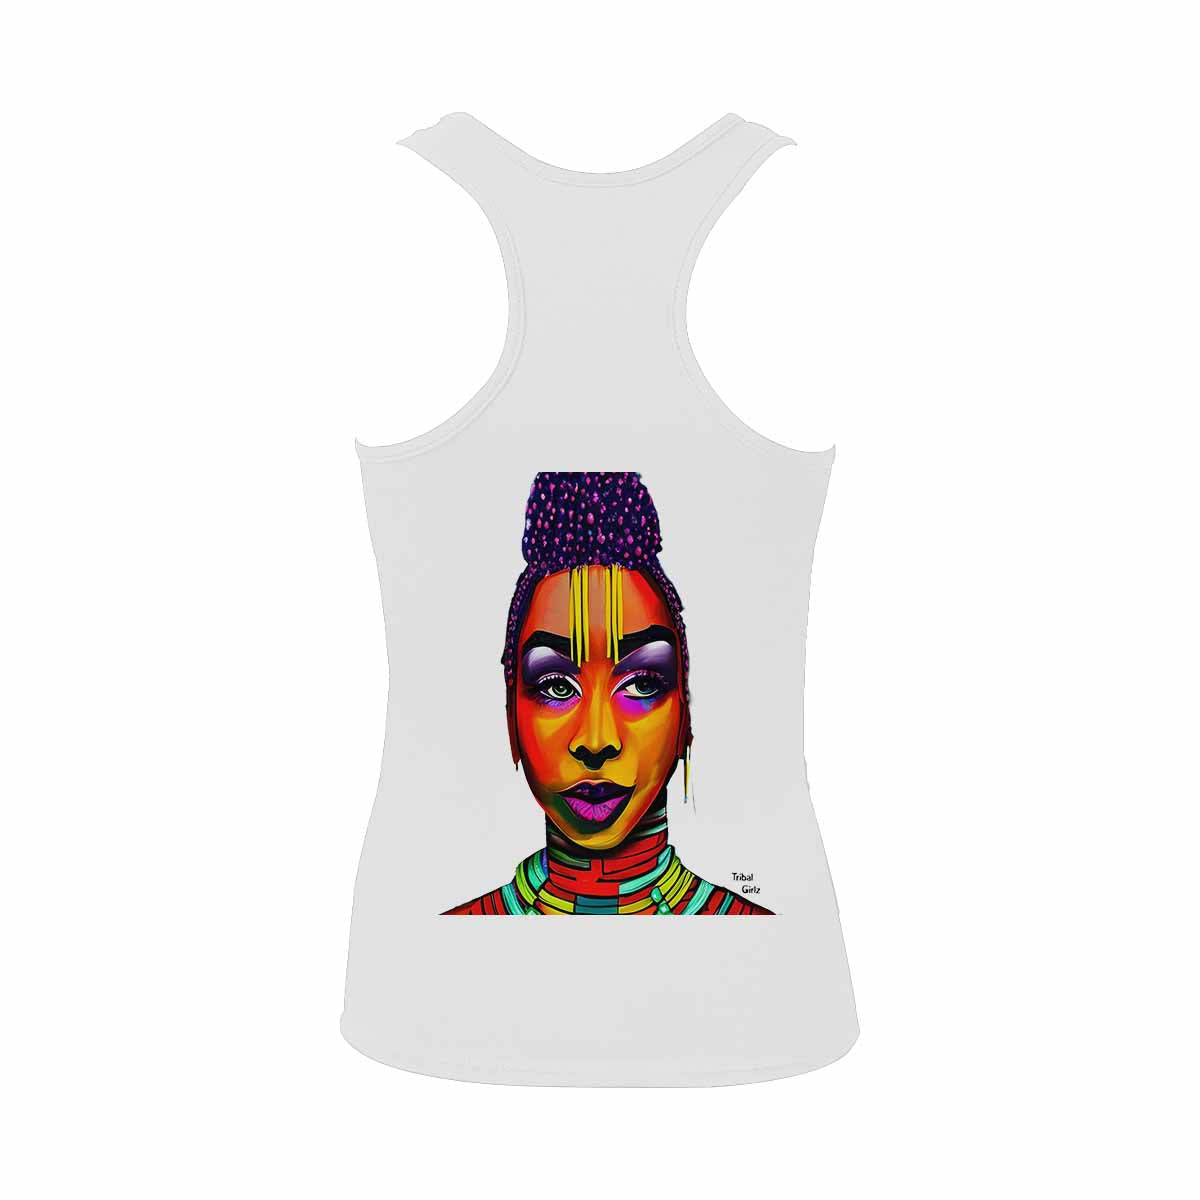 Dreads & Braids, WHITE tank top, cotton, african tribal, outline BL, Fulangiara 35